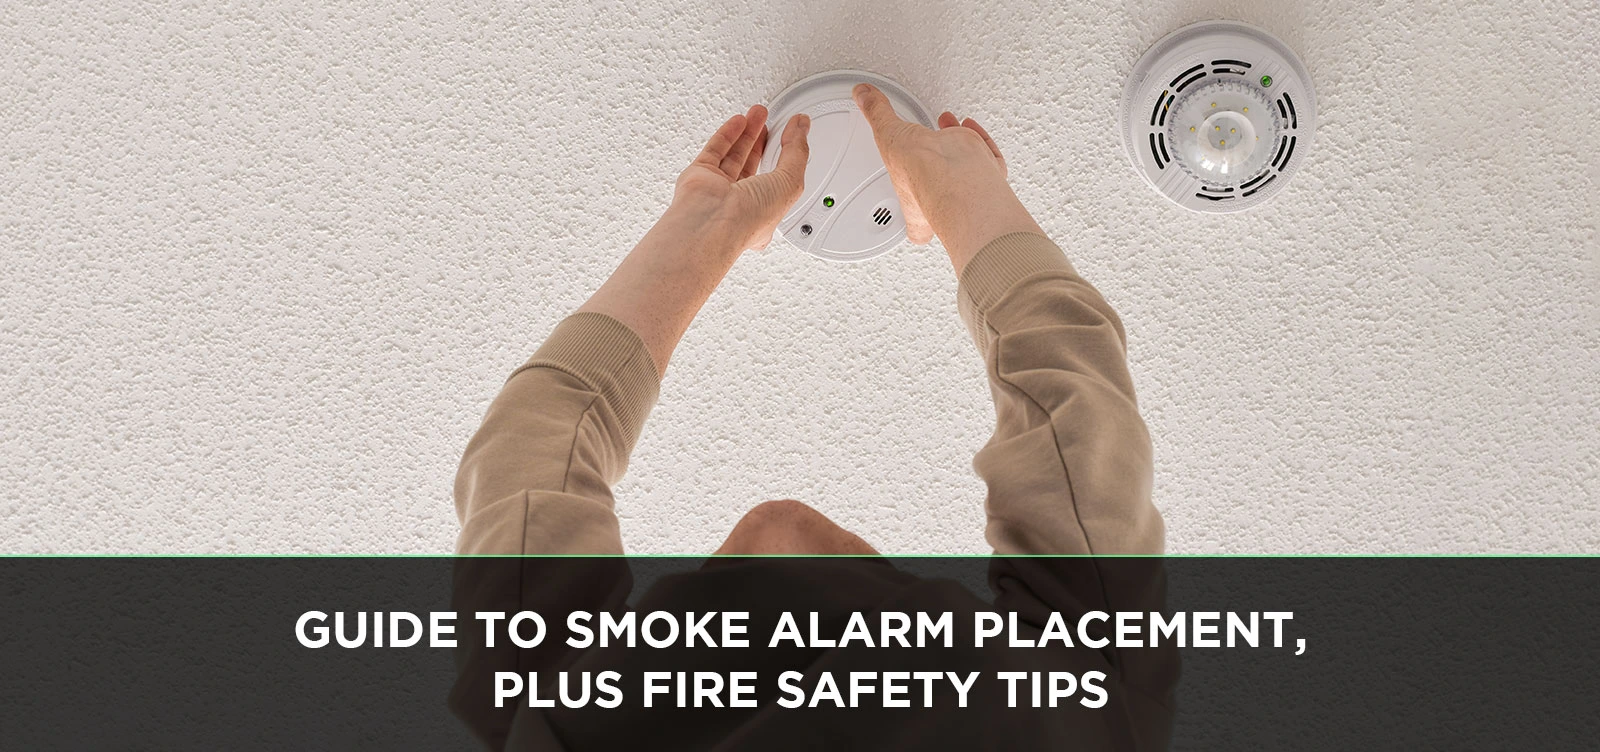 Guide to Smoke Alarm Placement, Plus Fire Safety Tips